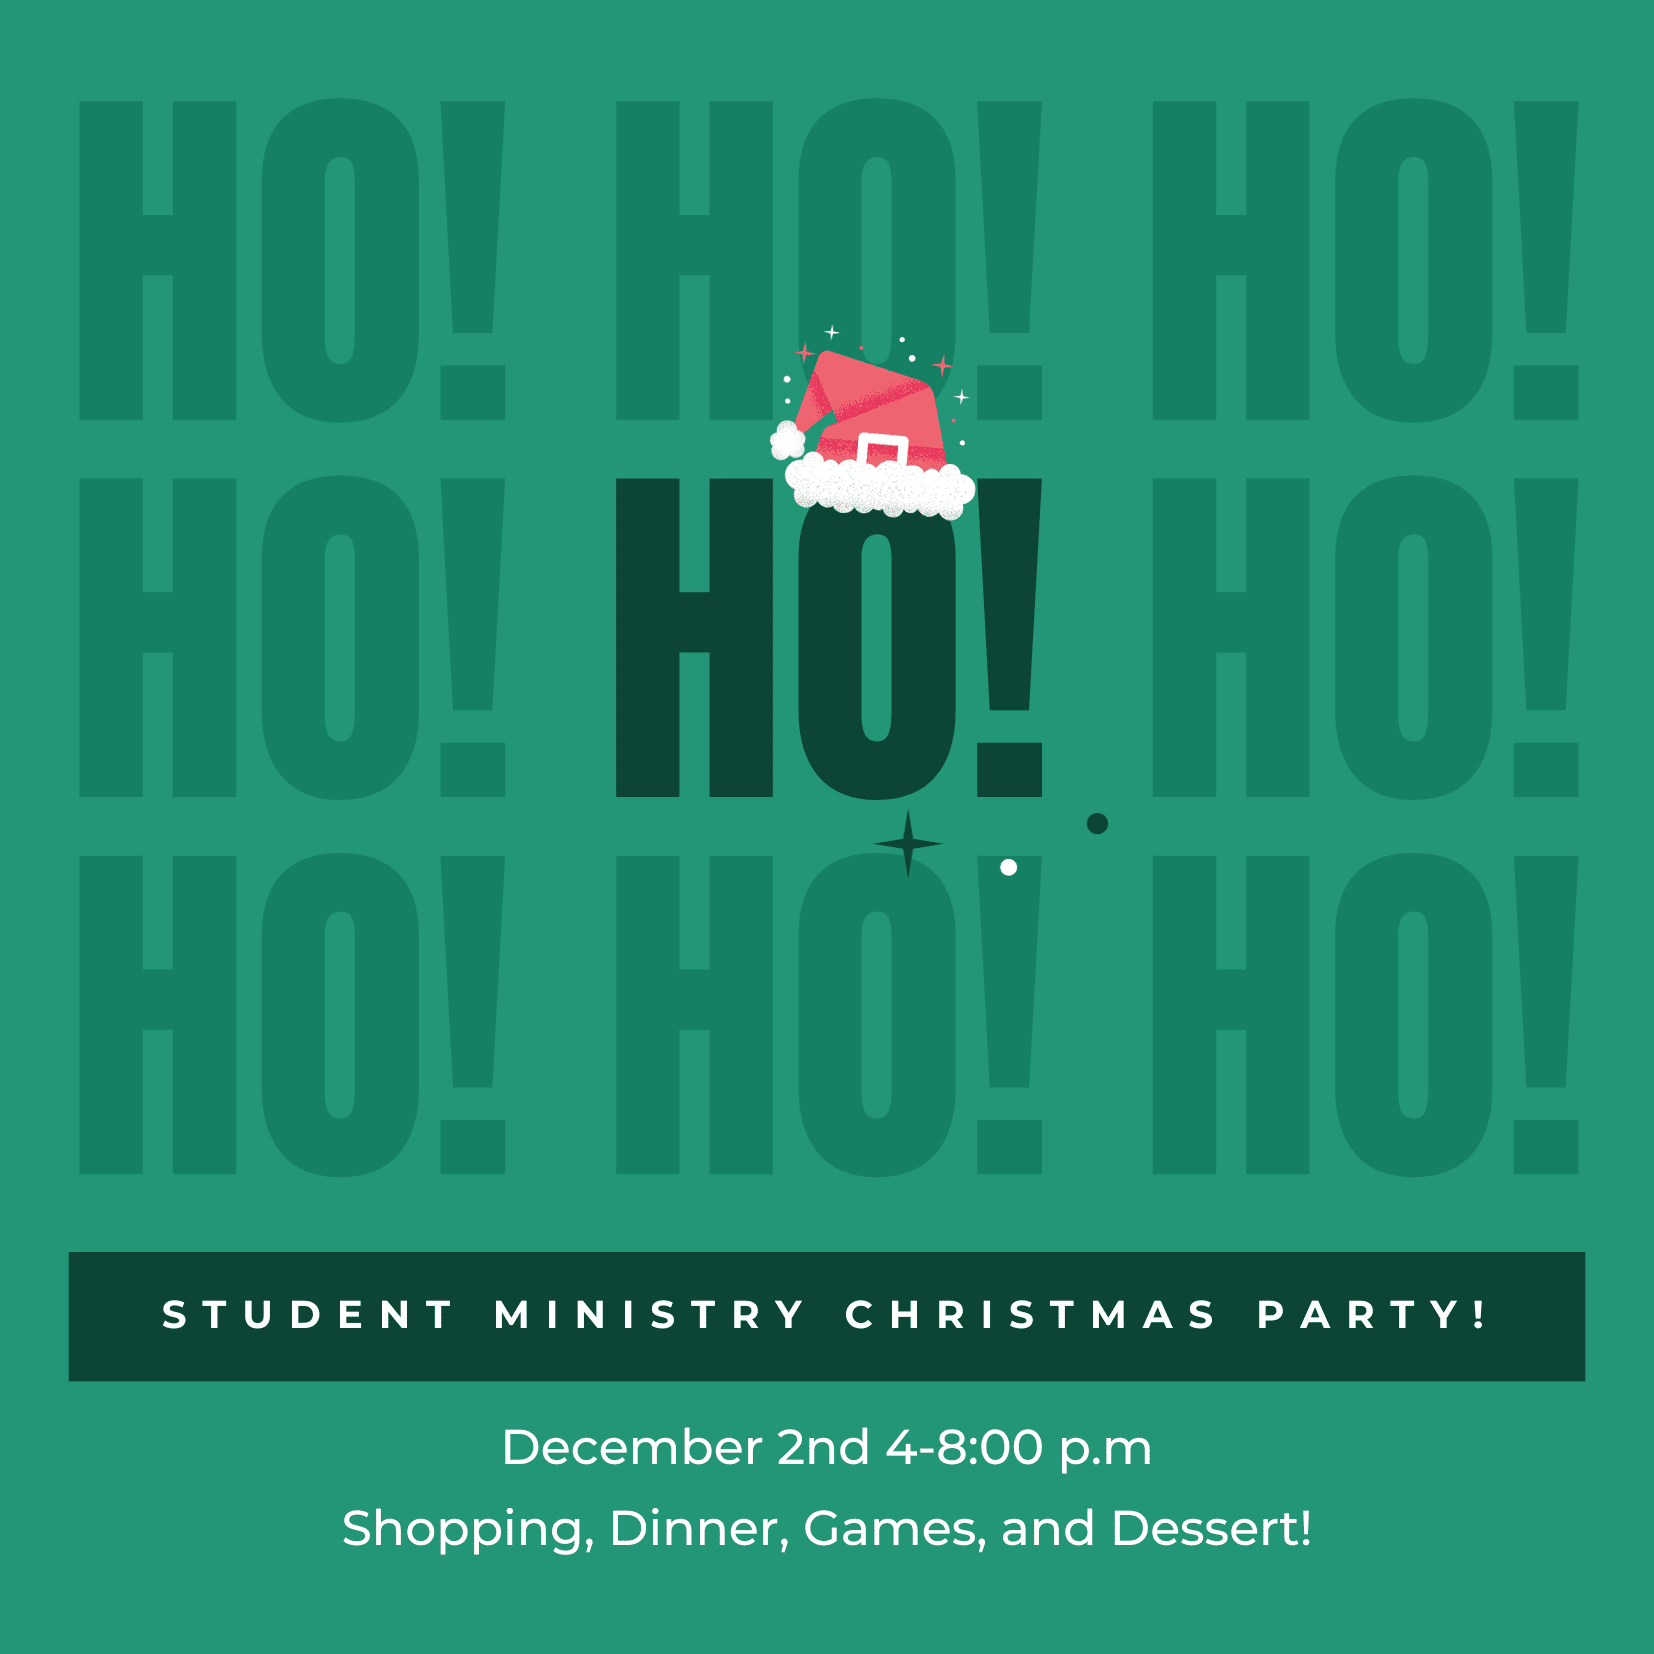 Student Ministry Christmas Party